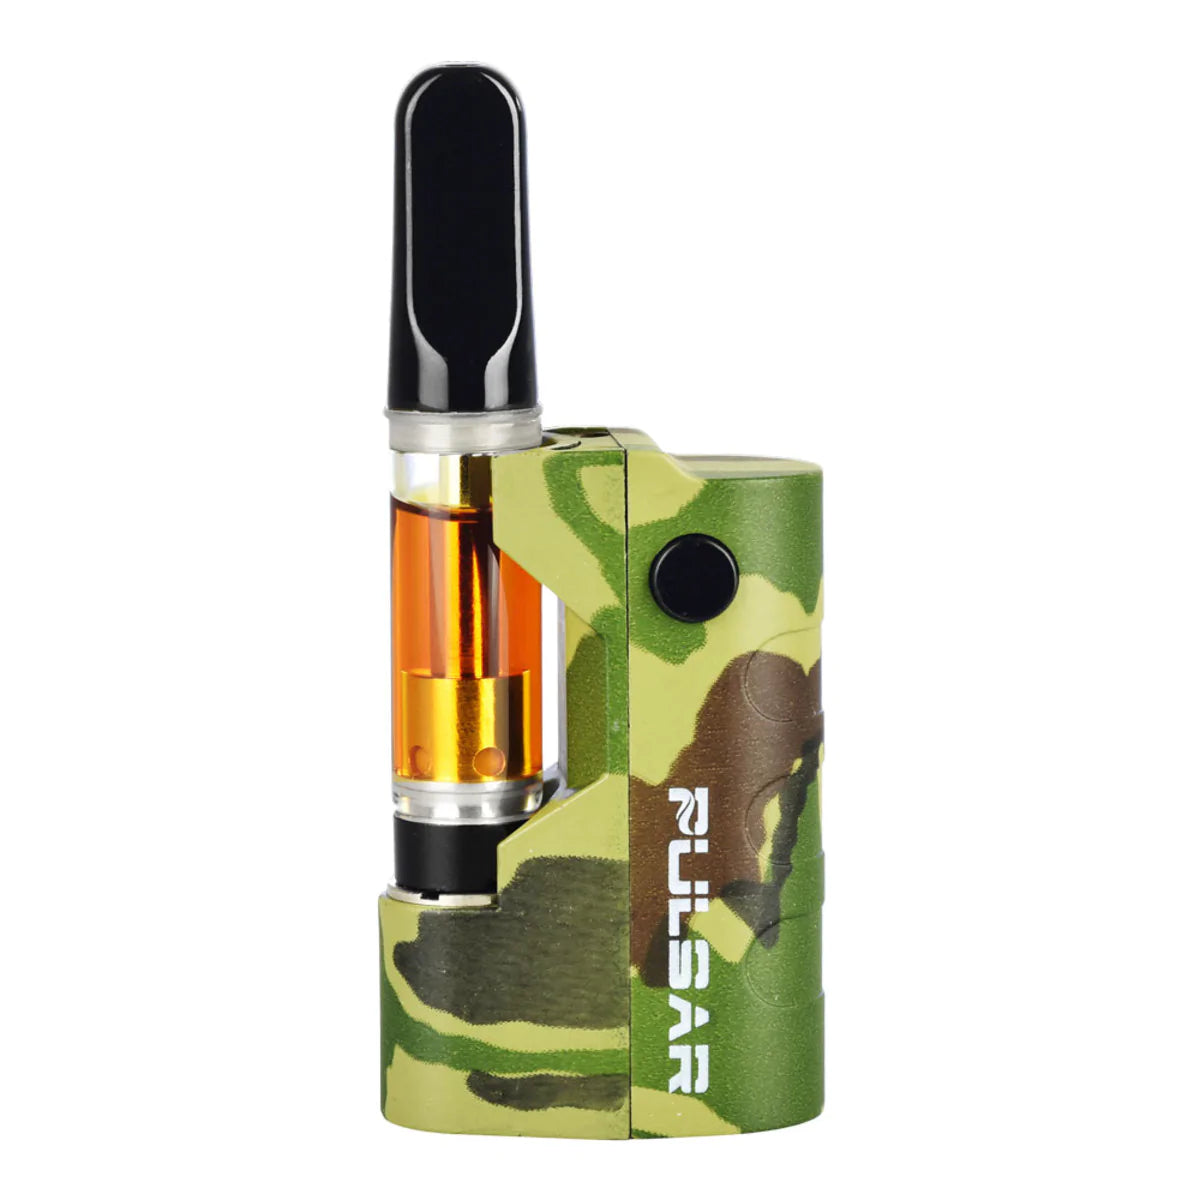 Pulsar GIGI Vaporizer Battery in Camouflage, compact 2" design, front view on white background